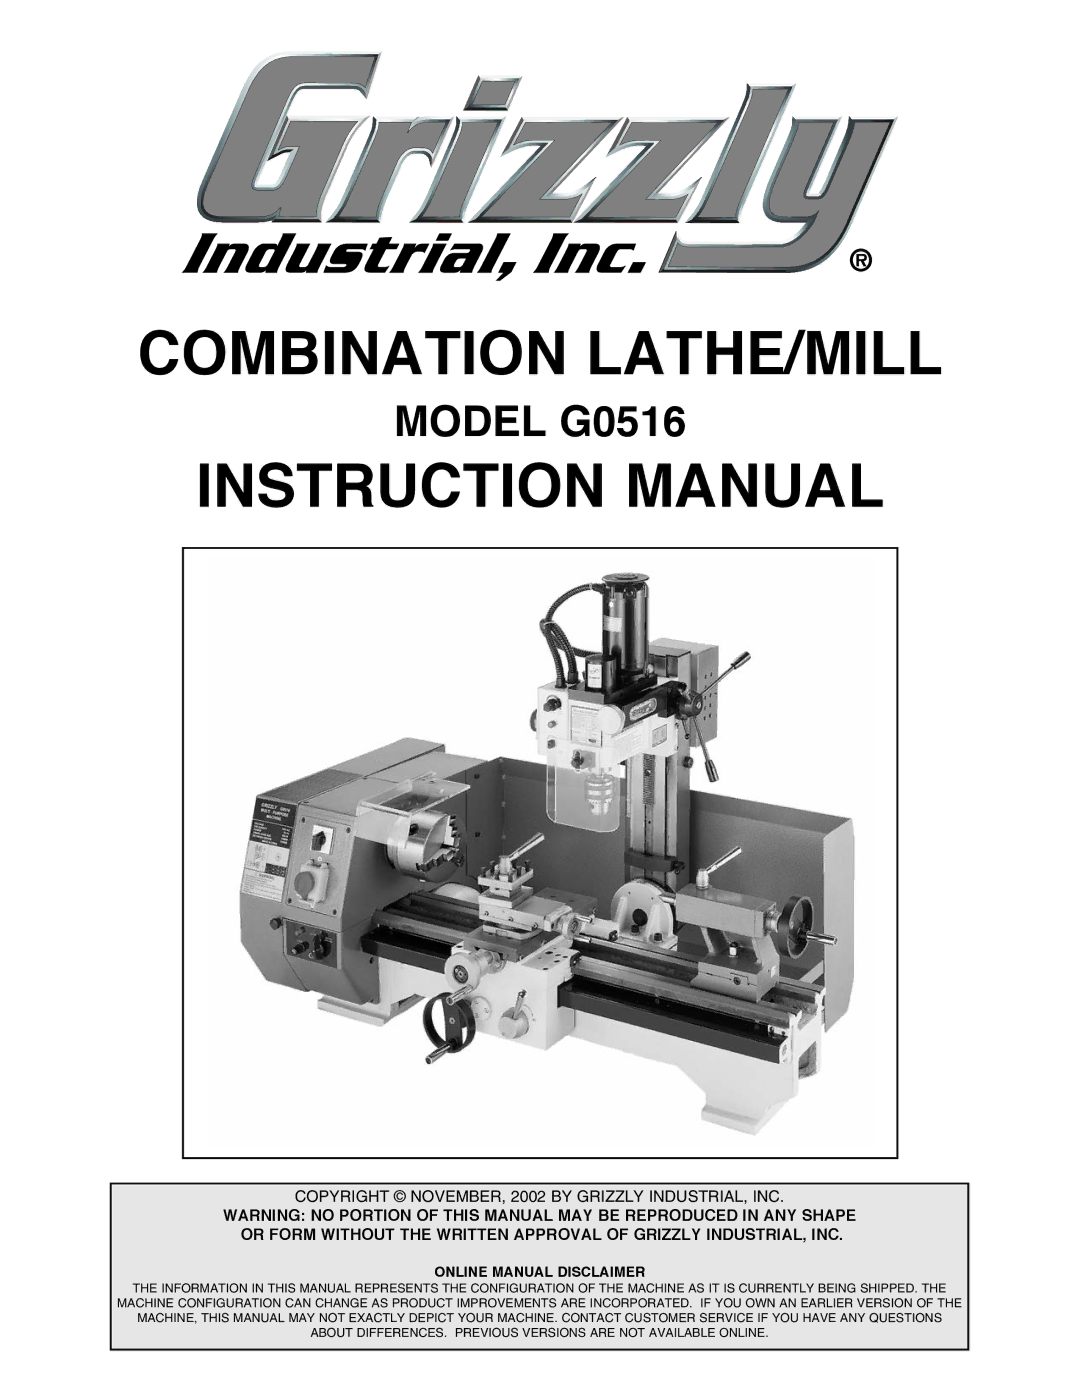 Grizzly G0516 instruction manual Combination LATHE/MILL 